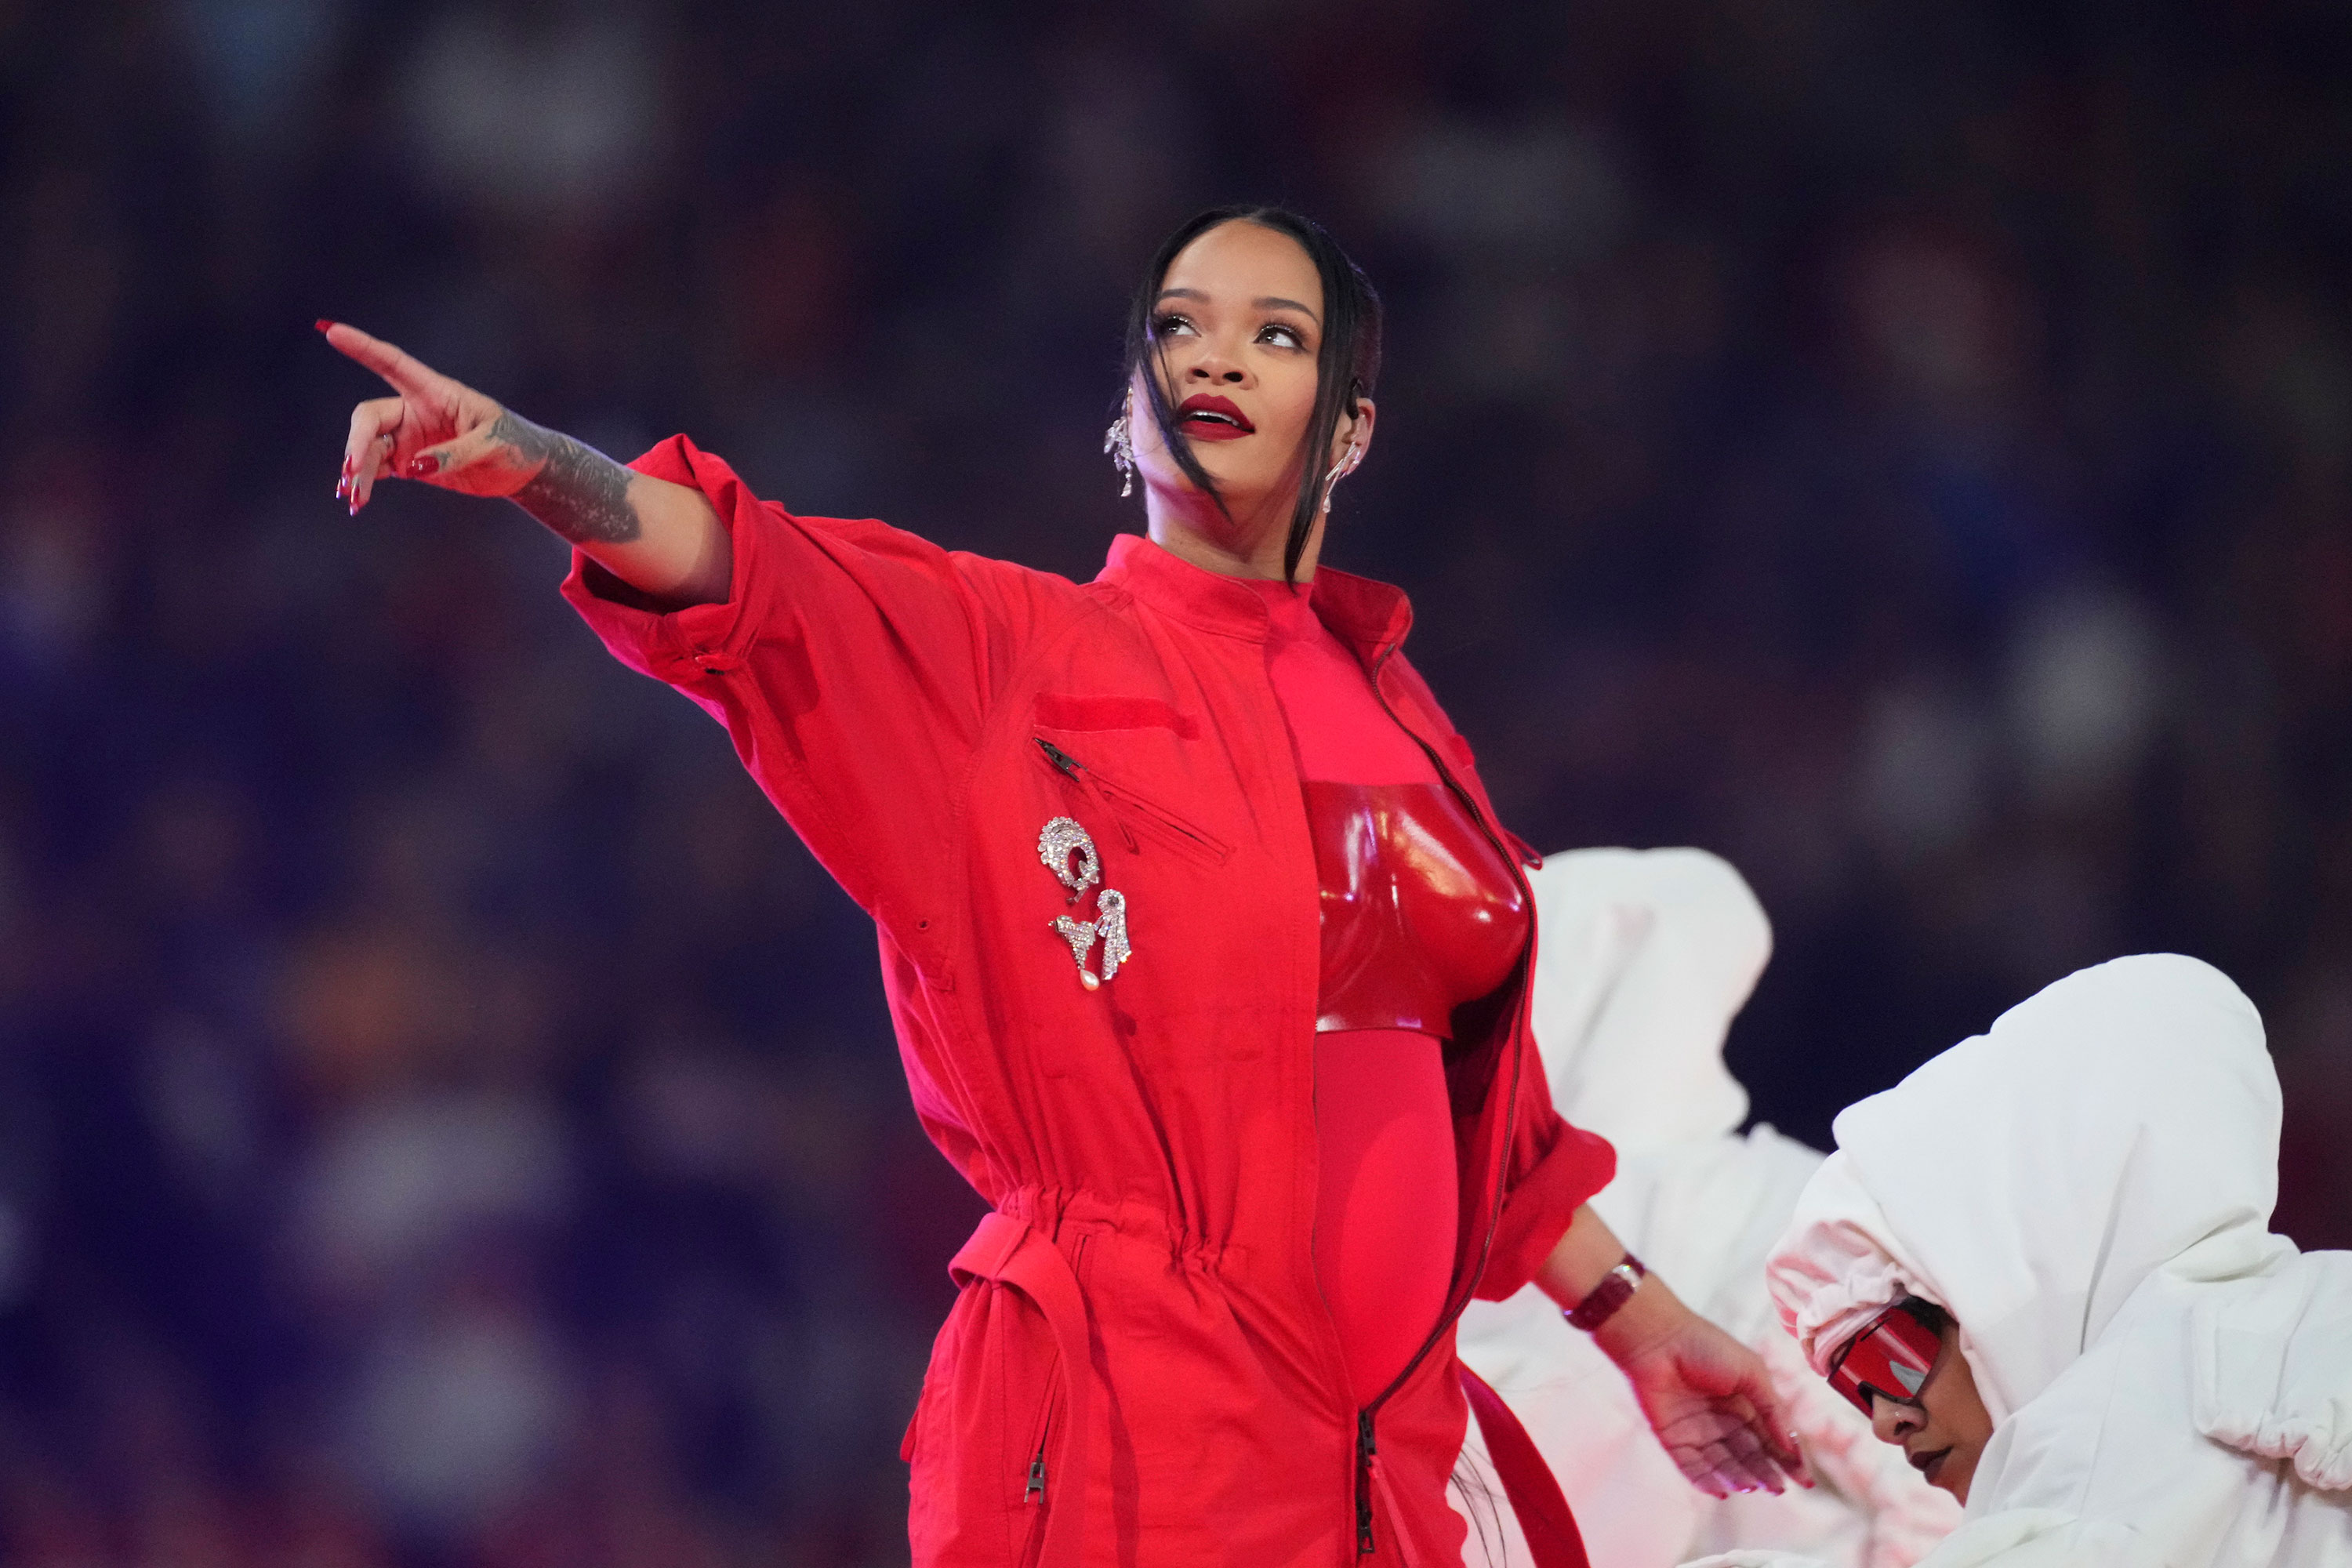 NOW Rihanna performs in the Super Bowl halftime show